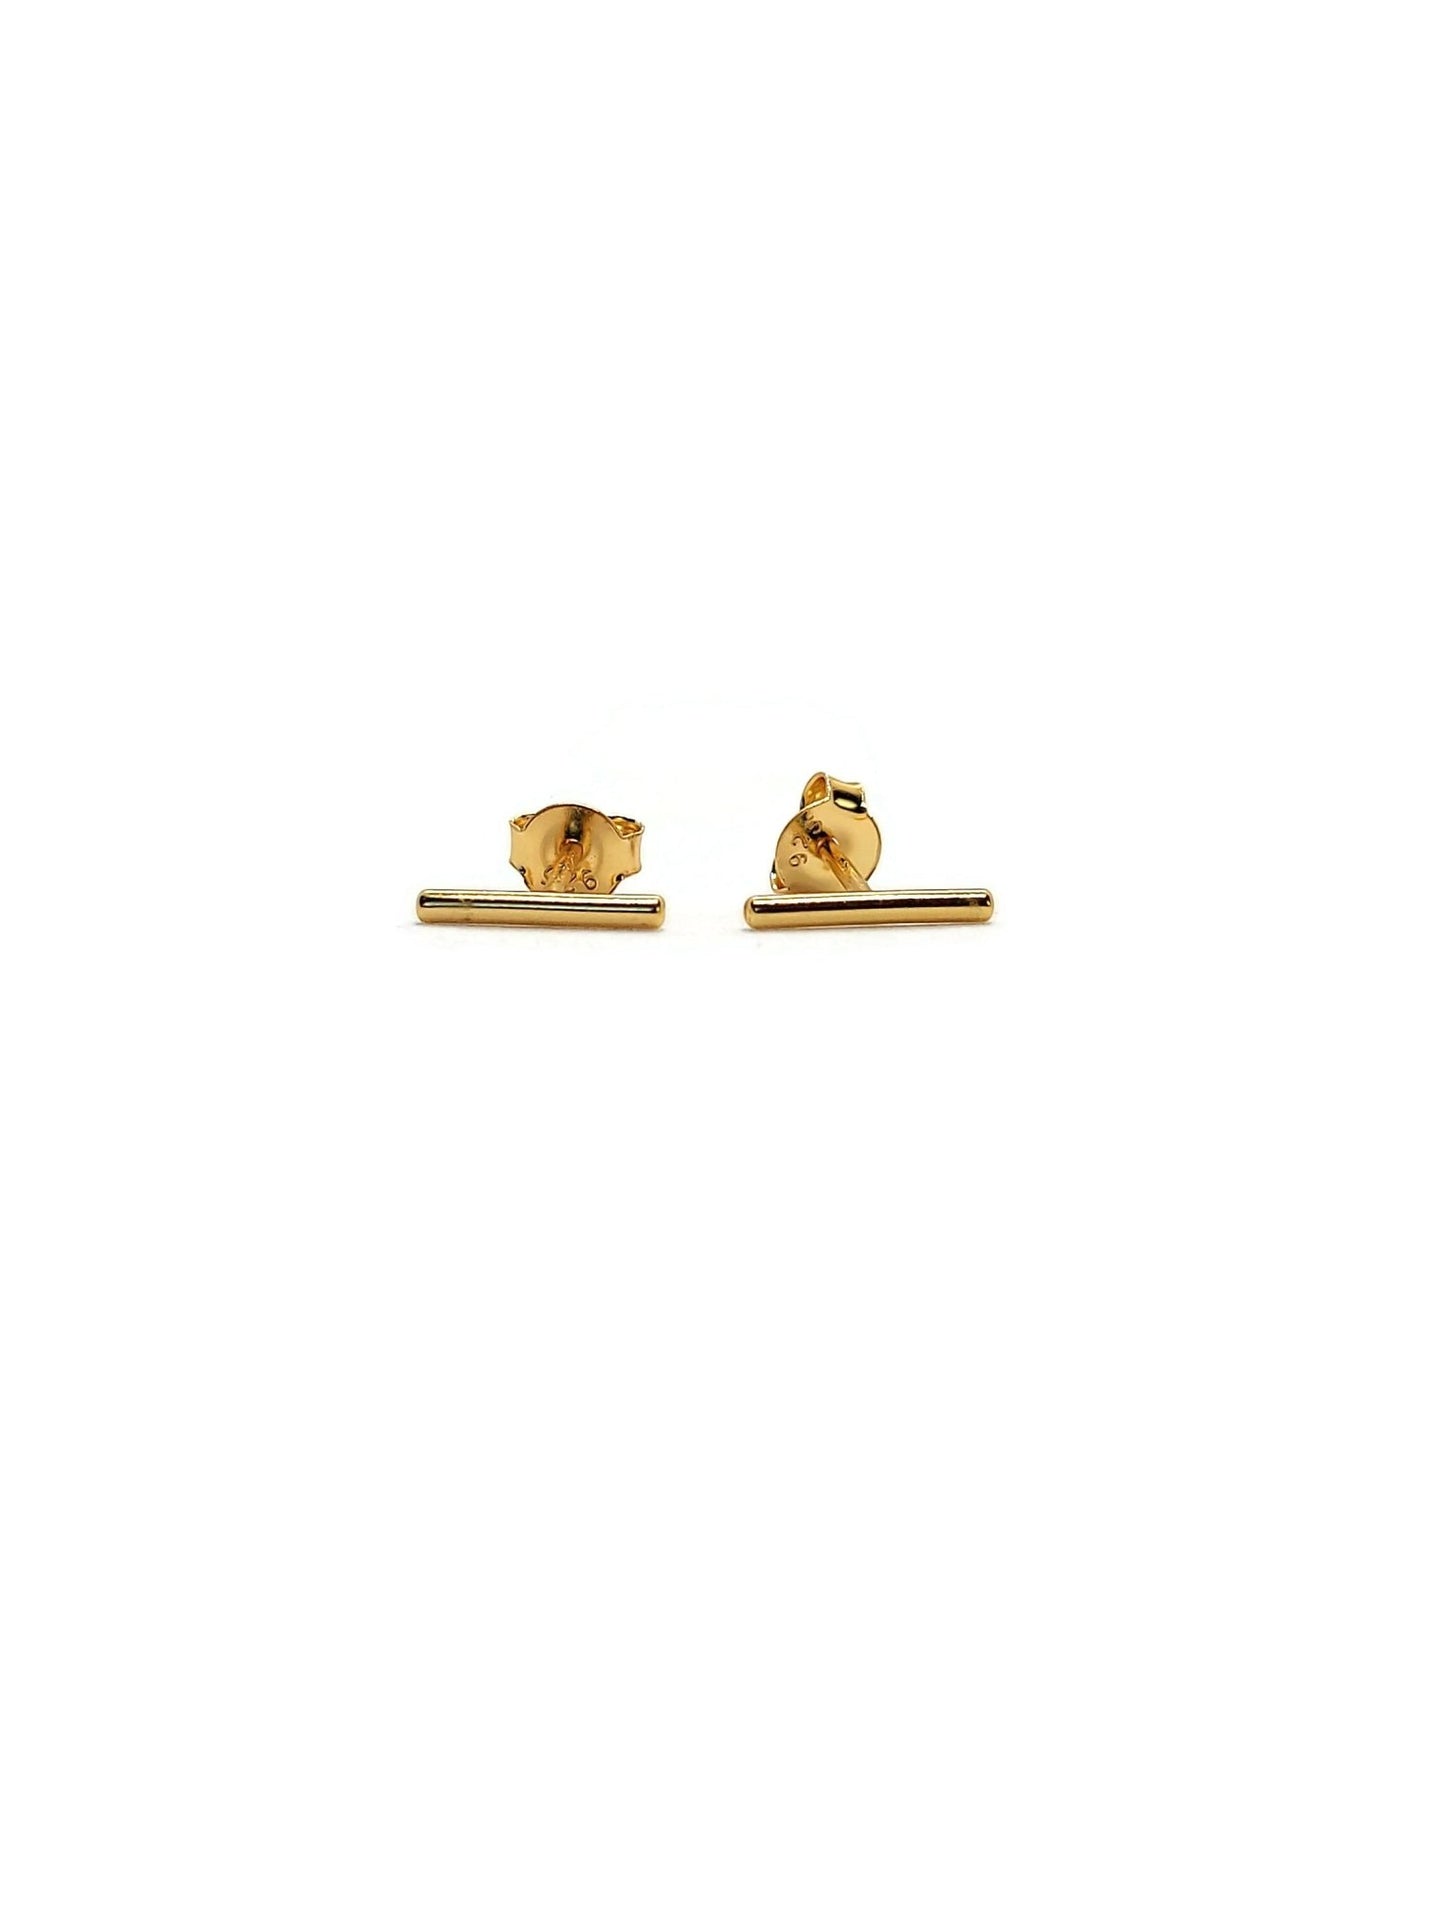 gold stick stud post earrings. gold vermeil. gold plated silver3